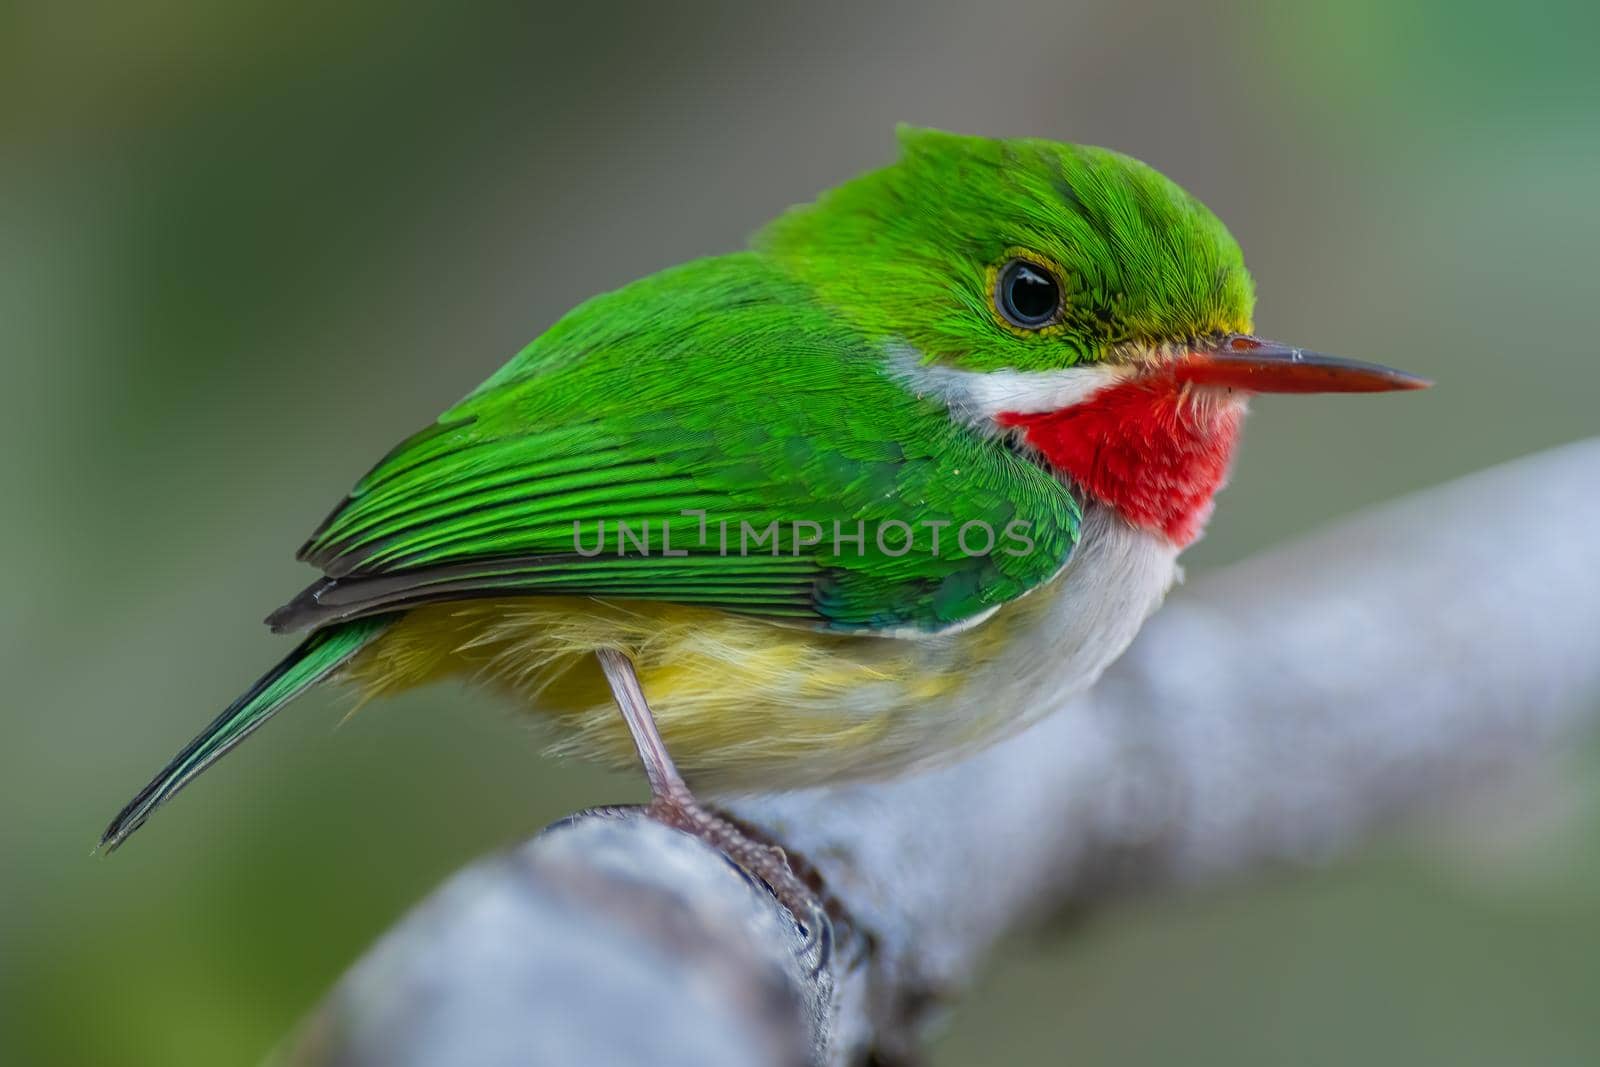 Puerto Rican Tody is a tiny, brilliant-green resident of wooded habitats